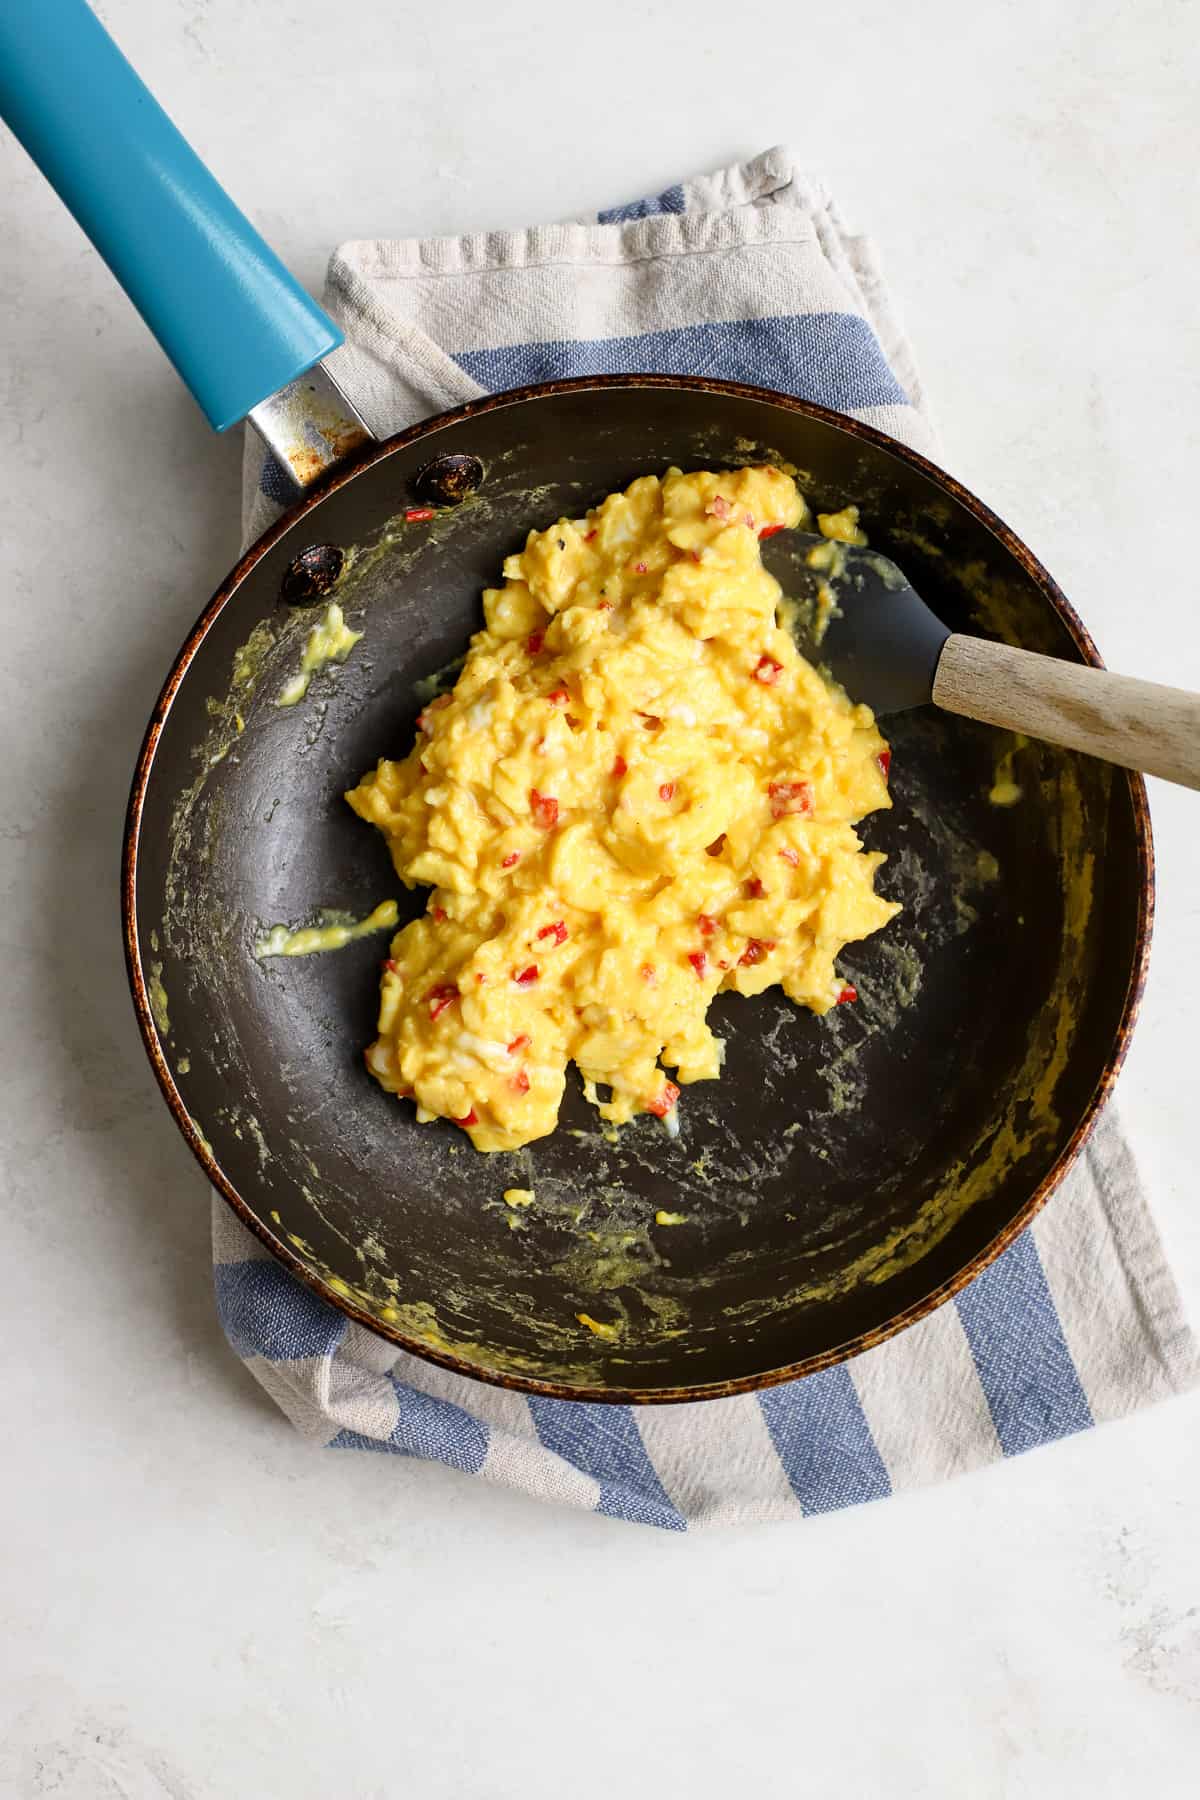 Soft, creamy chilli scrambled eggs in small blue sauté pan on blue and white striped towel on light gray surface